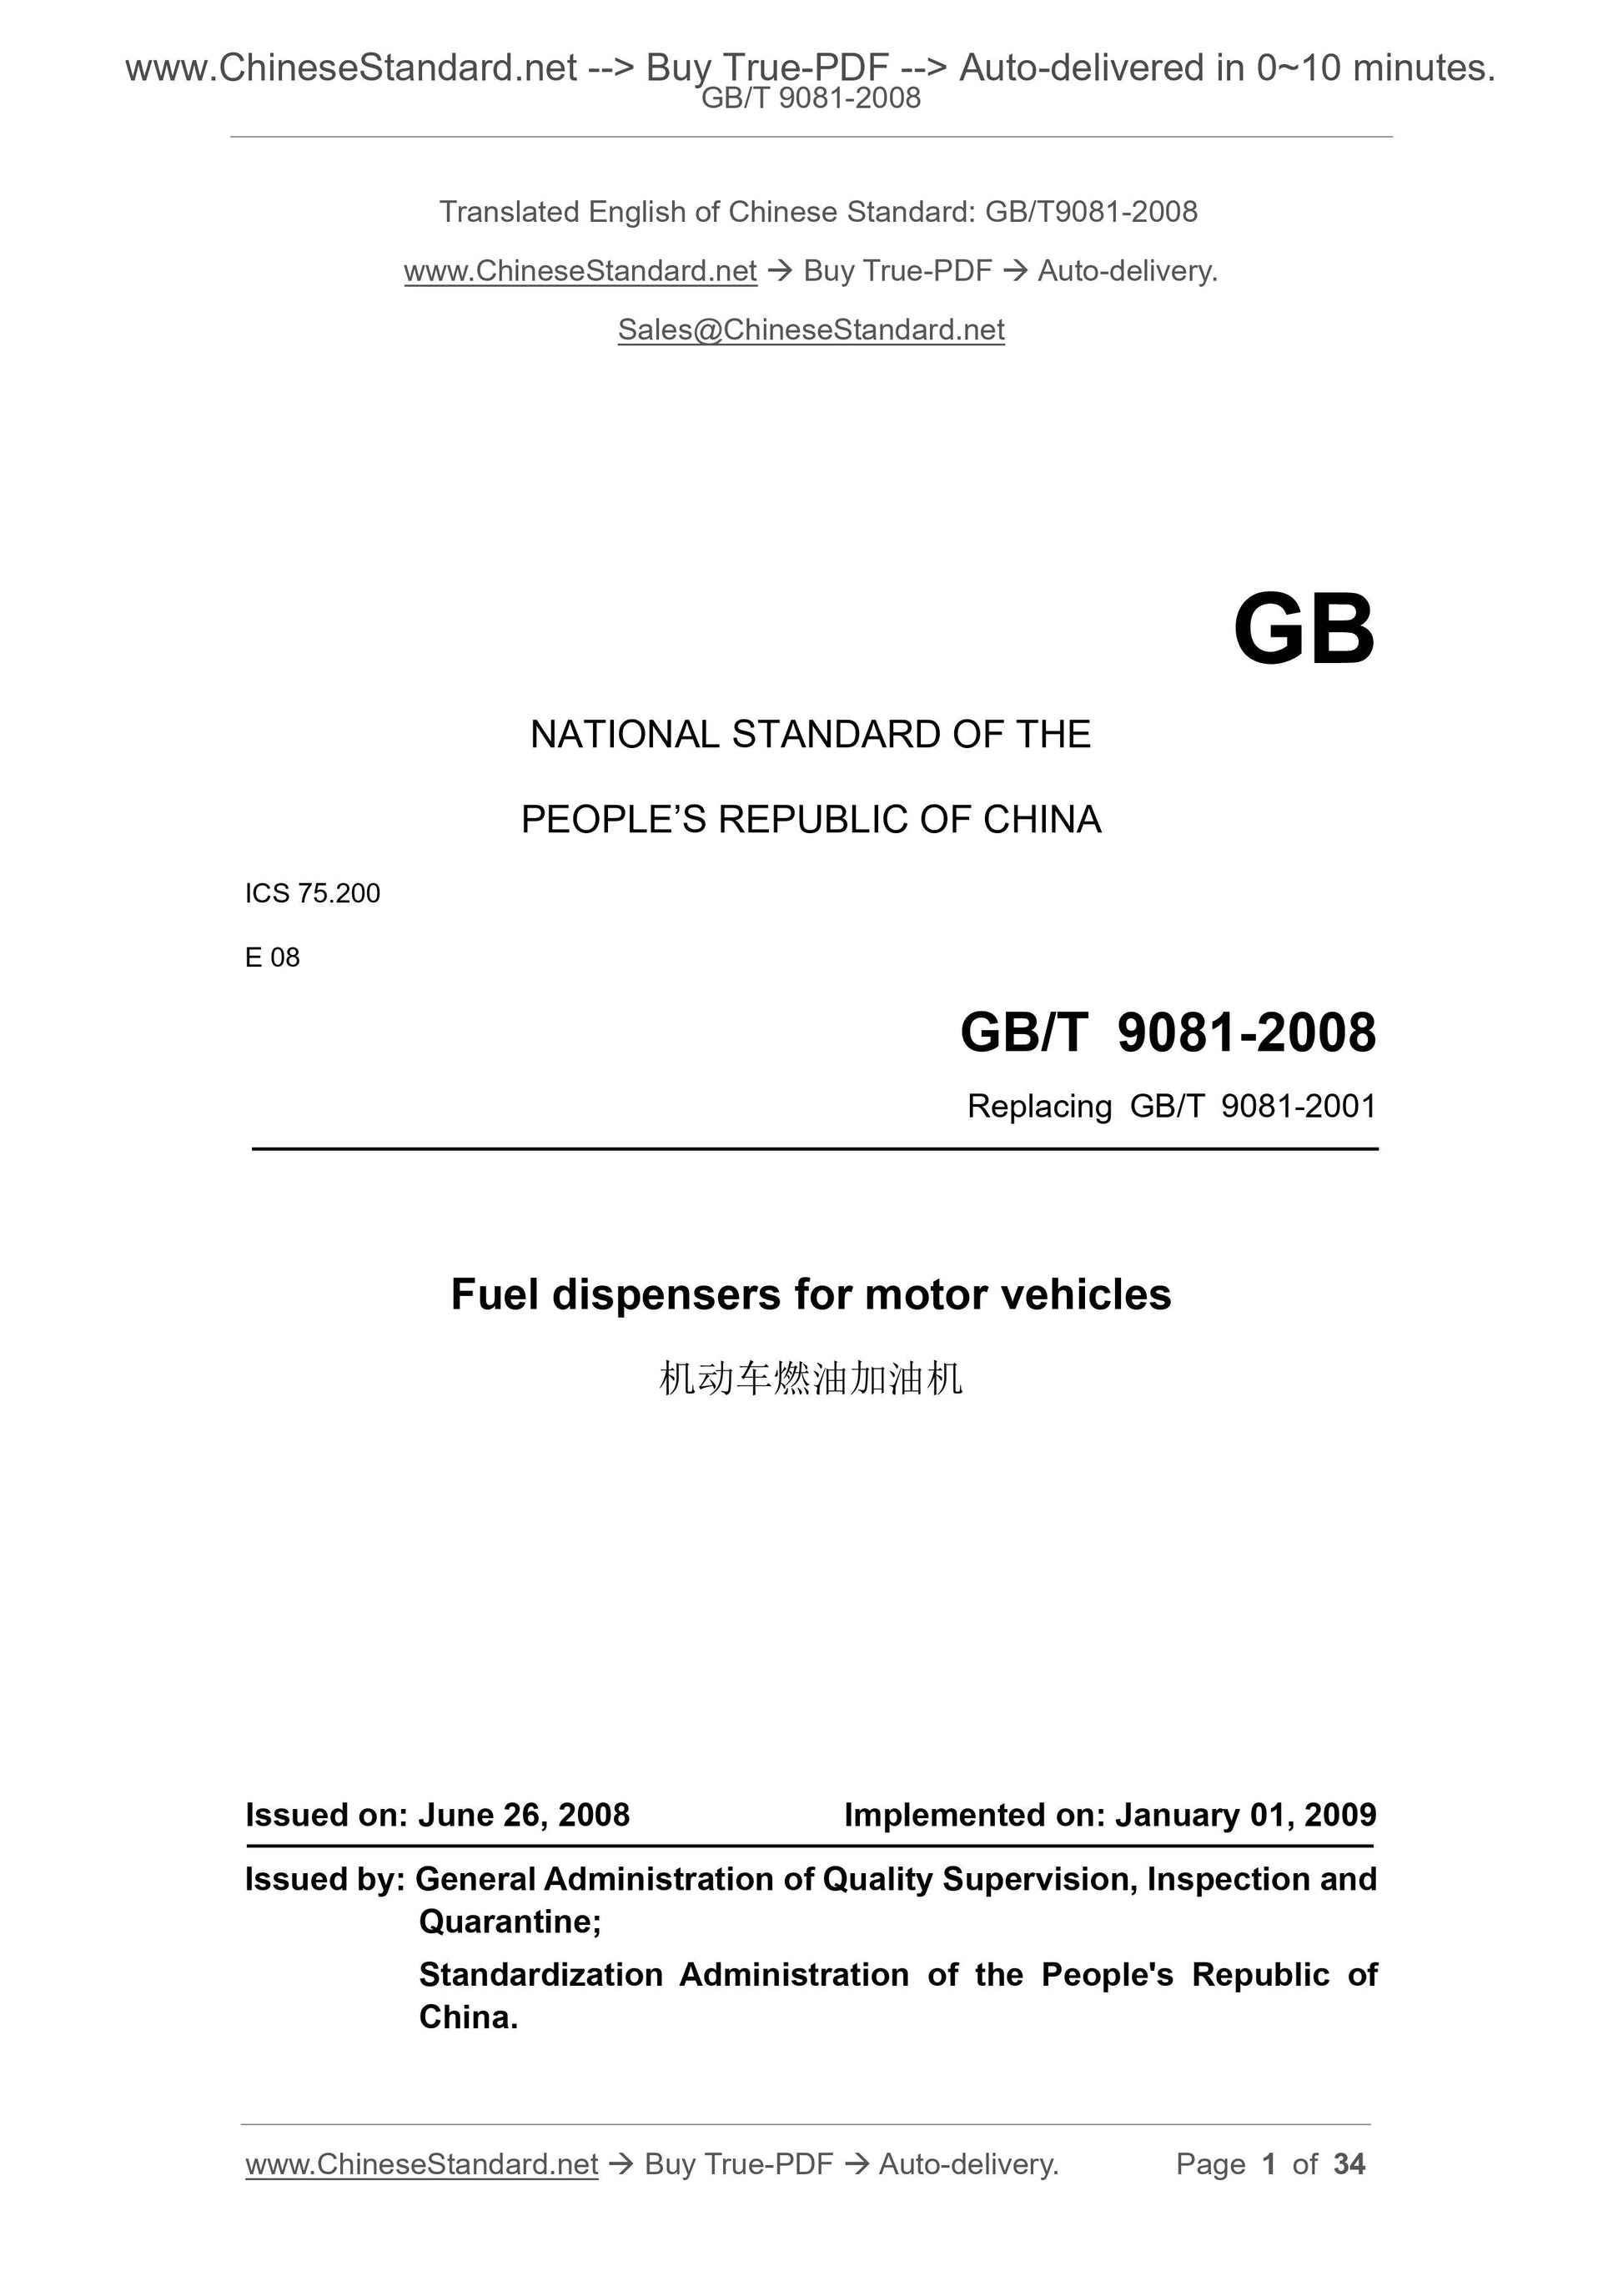 GB/T 9081-2008 Page 1